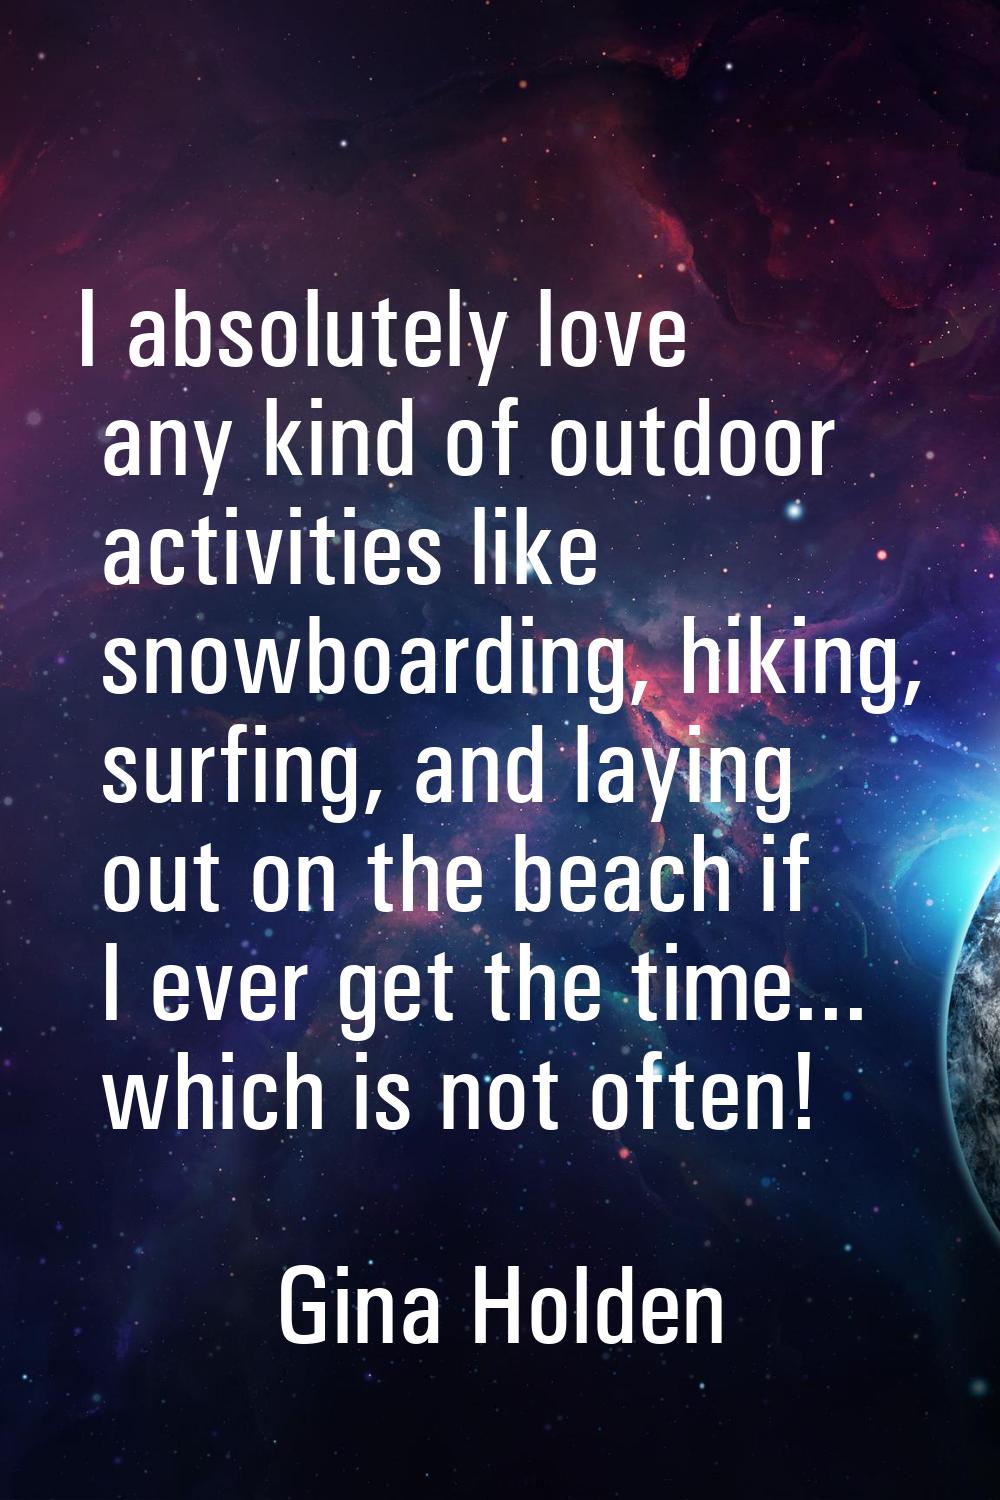 I absolutely love any kind of outdoor activities like snowboarding, hiking, surfing, and laying out